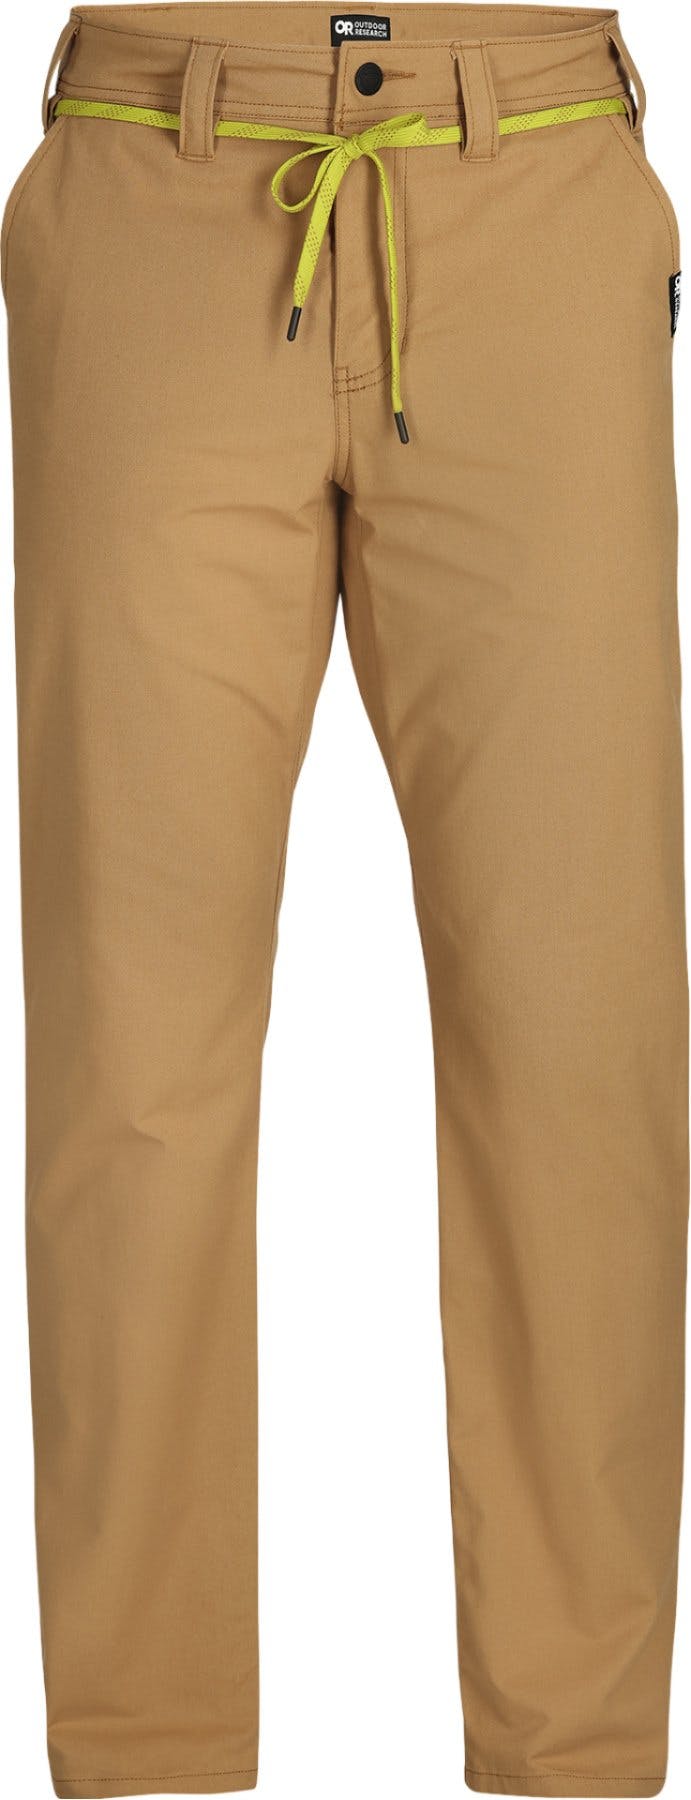 Product image for Canvas Pants 30 in - Men's